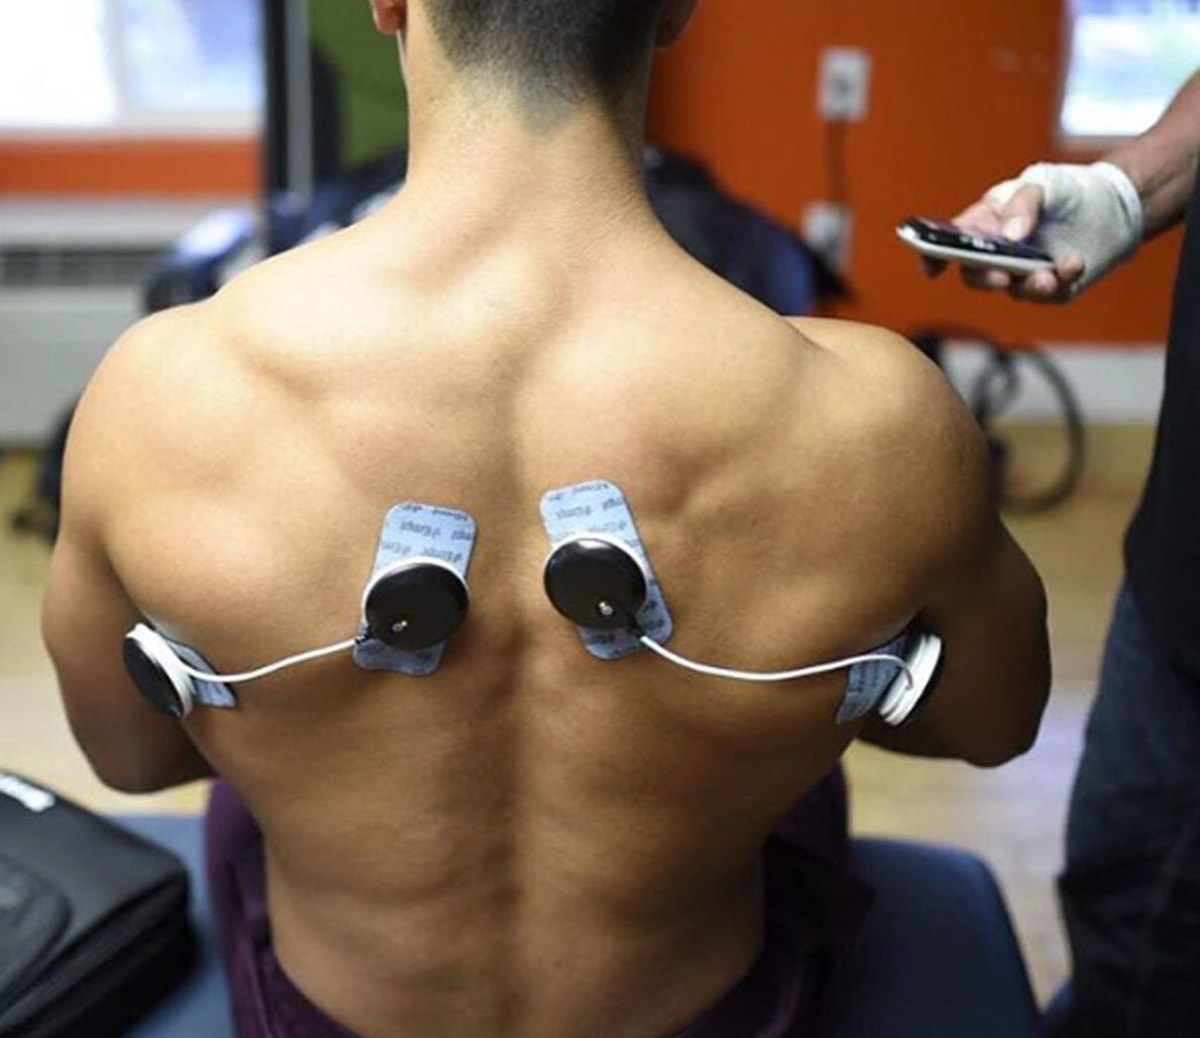 Can Electrical Stimulation Help You Put on More Muscle? - Muscle & Fitness